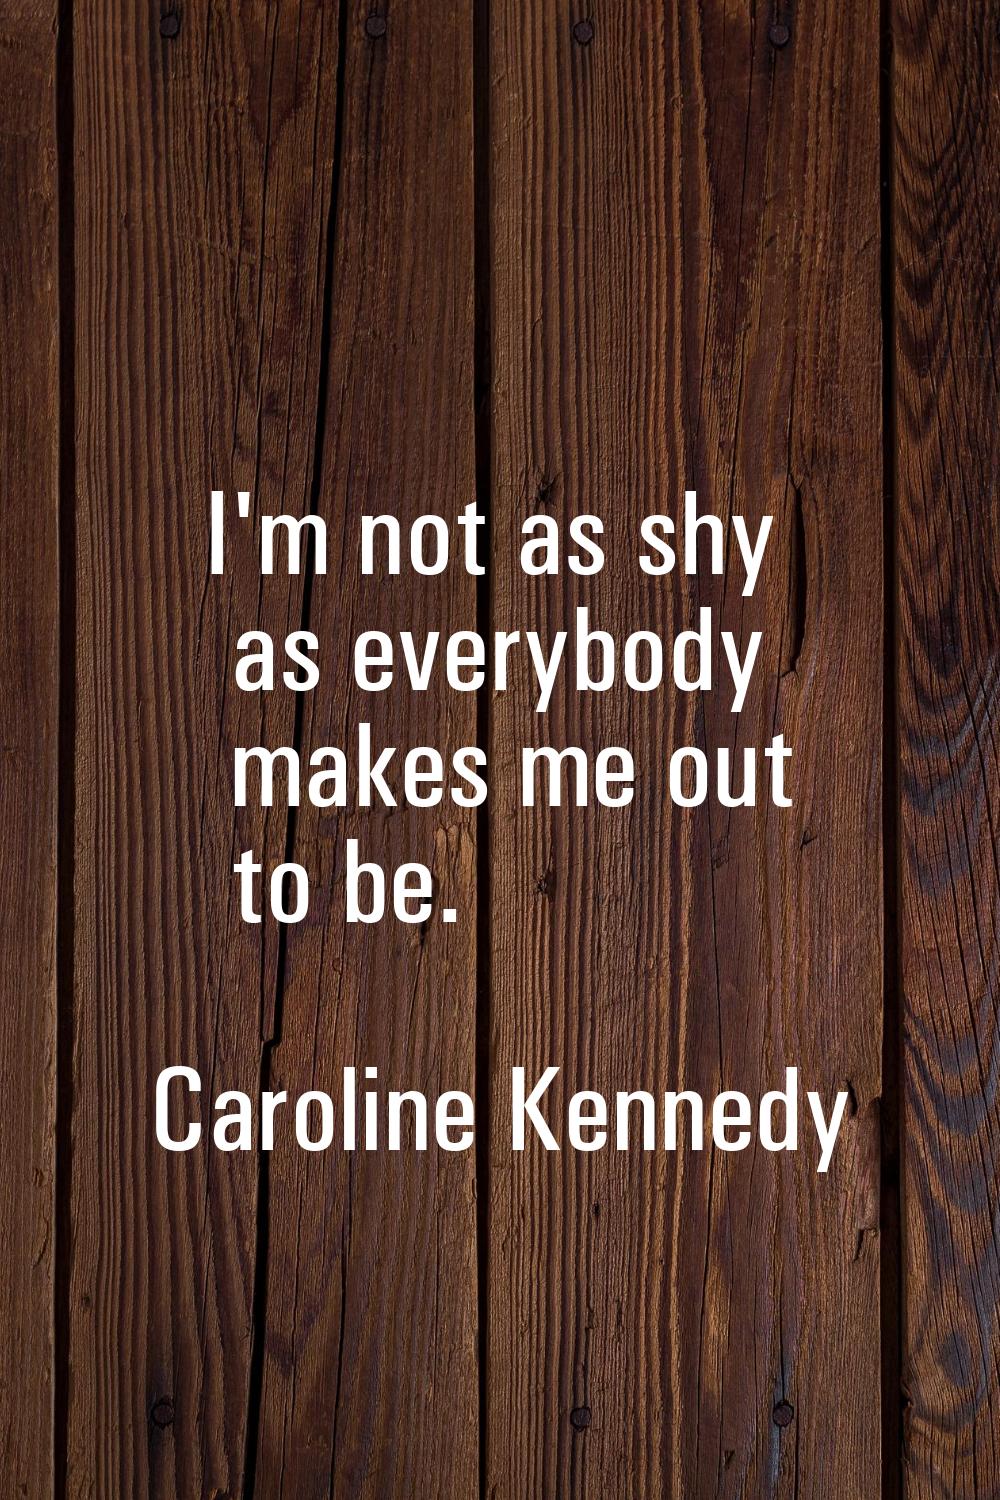 I'm not as shy as everybody makes me out to be.